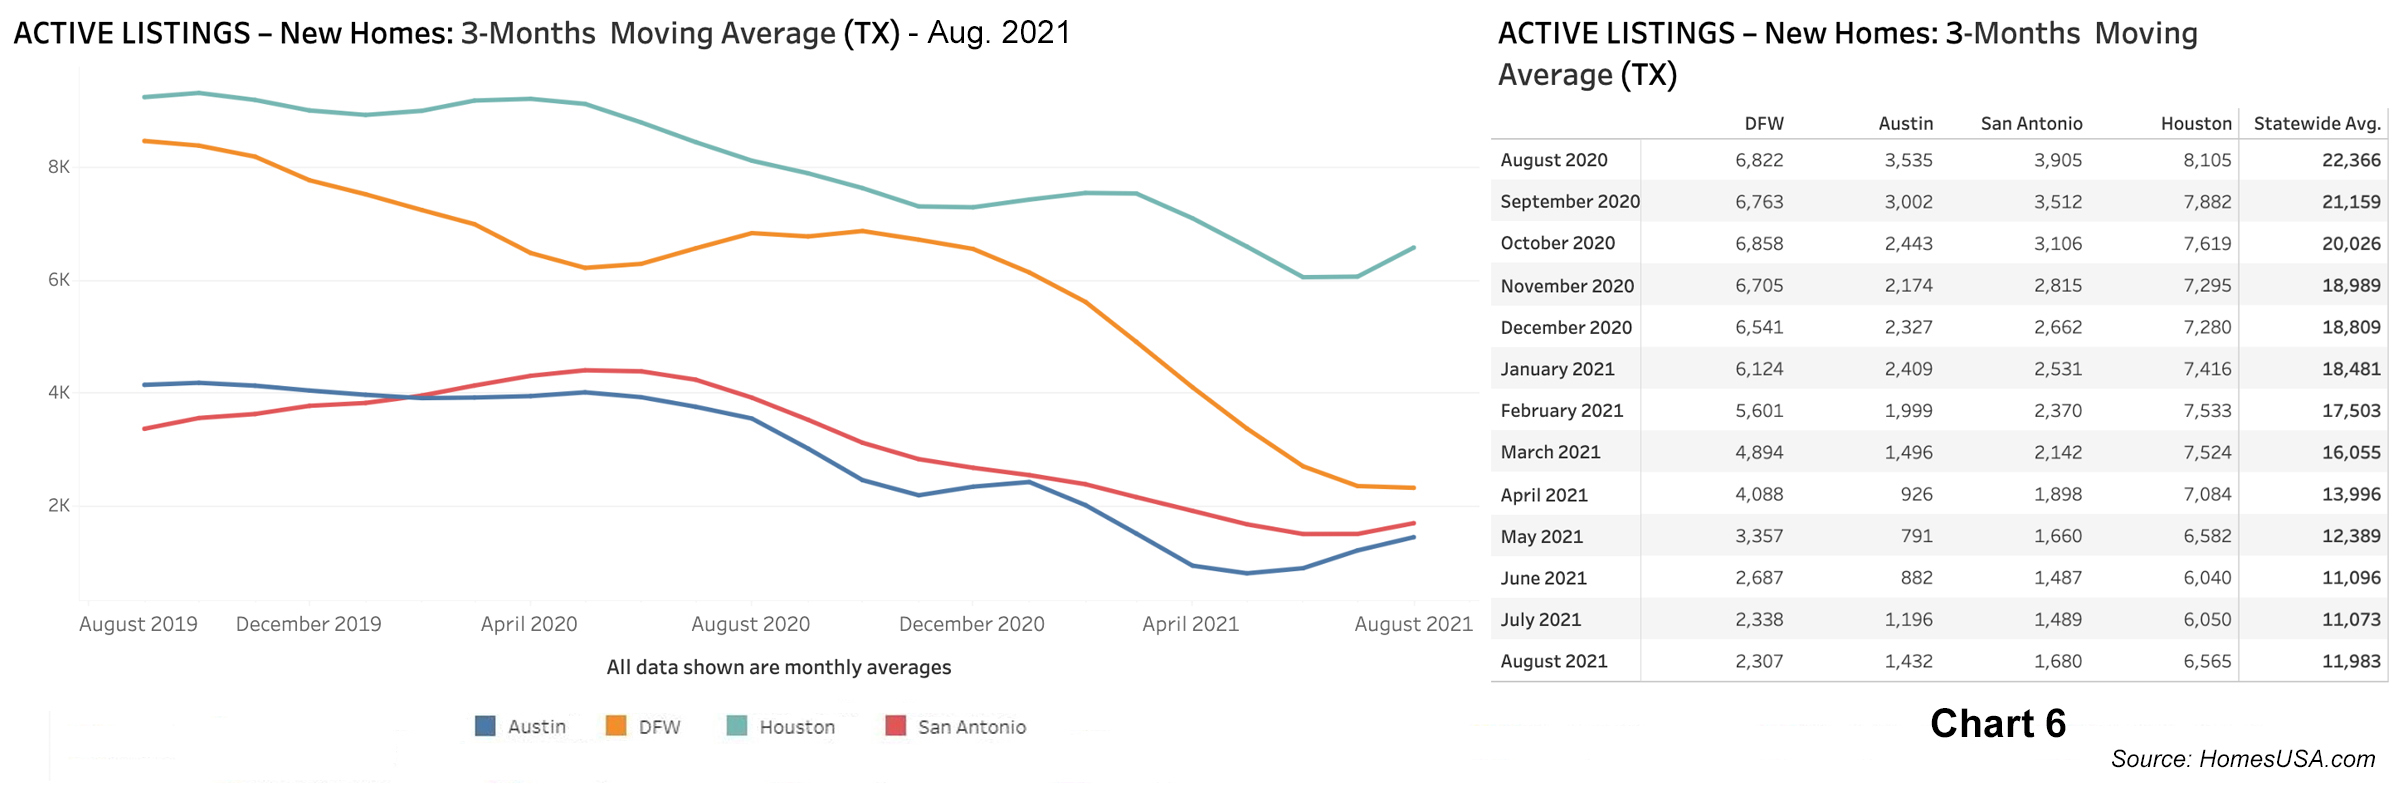 Chart 6: Active Listings for New Home Sales - August 2021